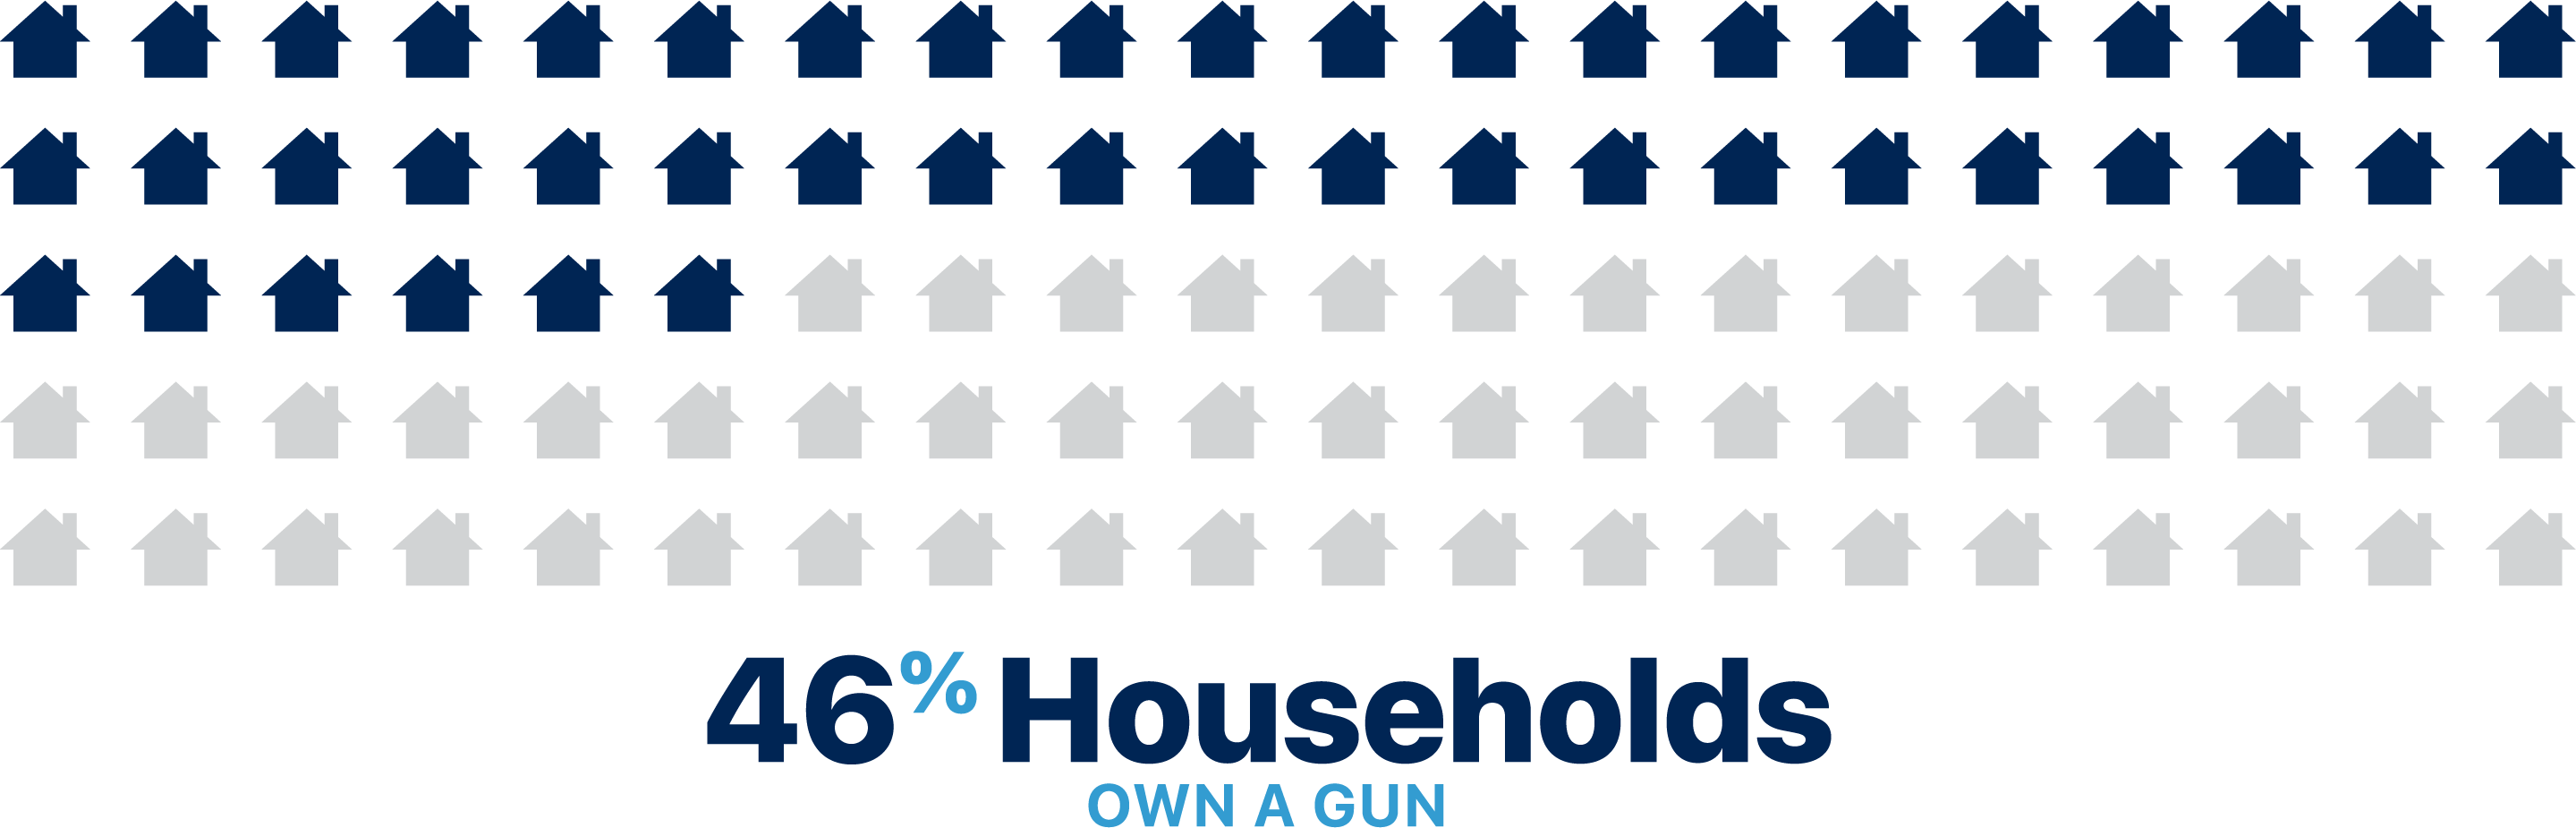 46 percent of households in America own at least one firearm